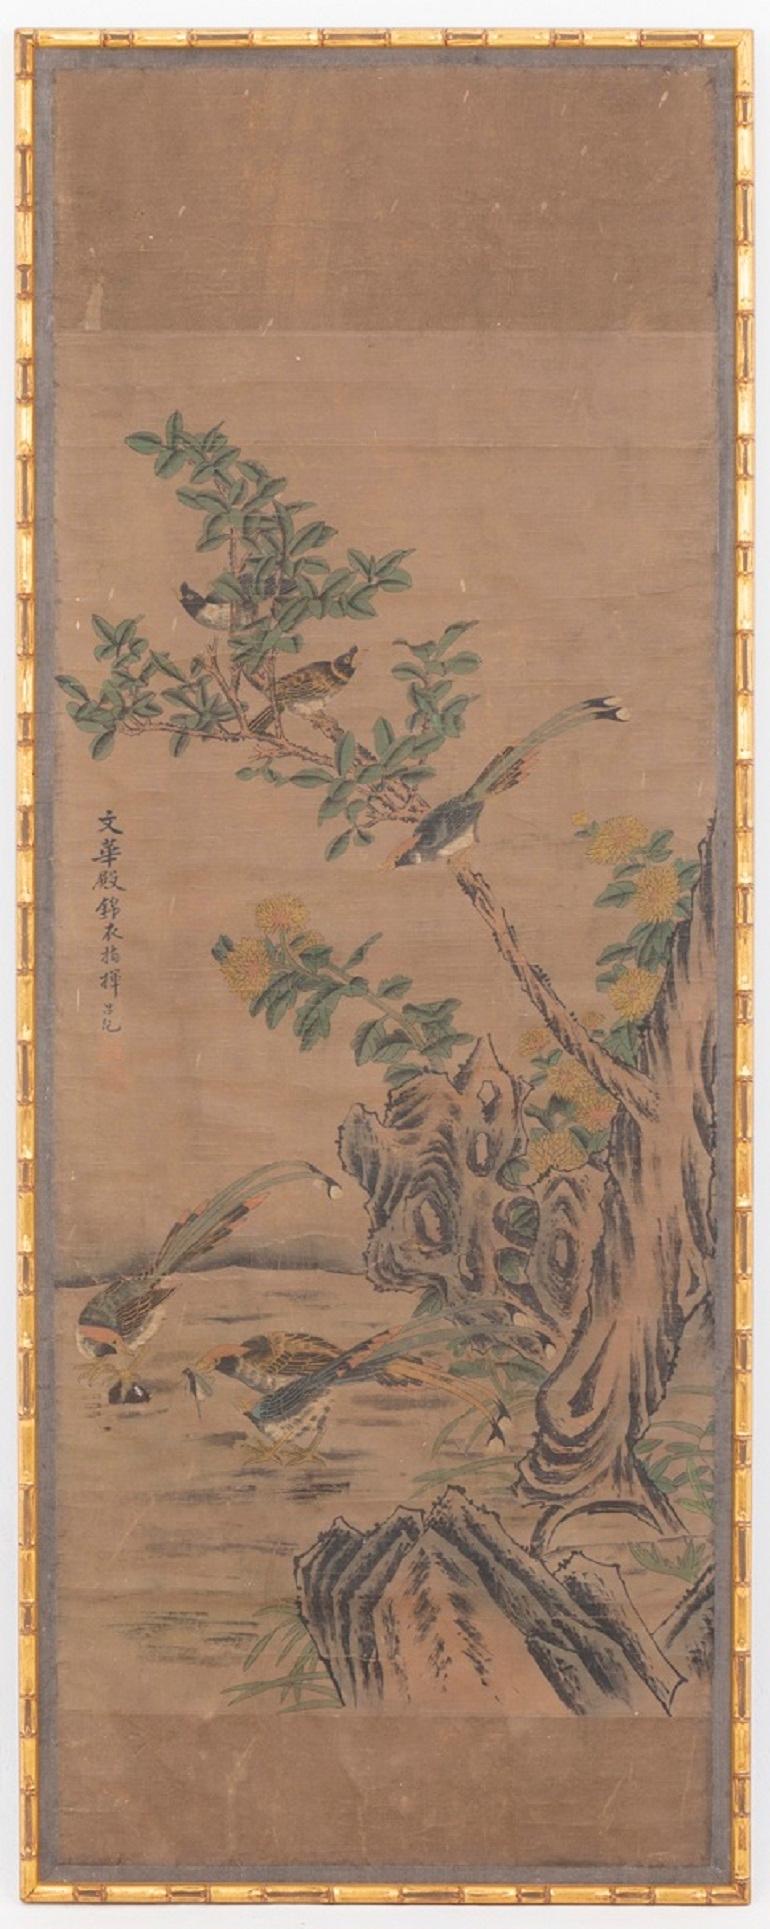 Hand-Painted Three Panels in Rice Paper with a Chinese Decor, circa 1880